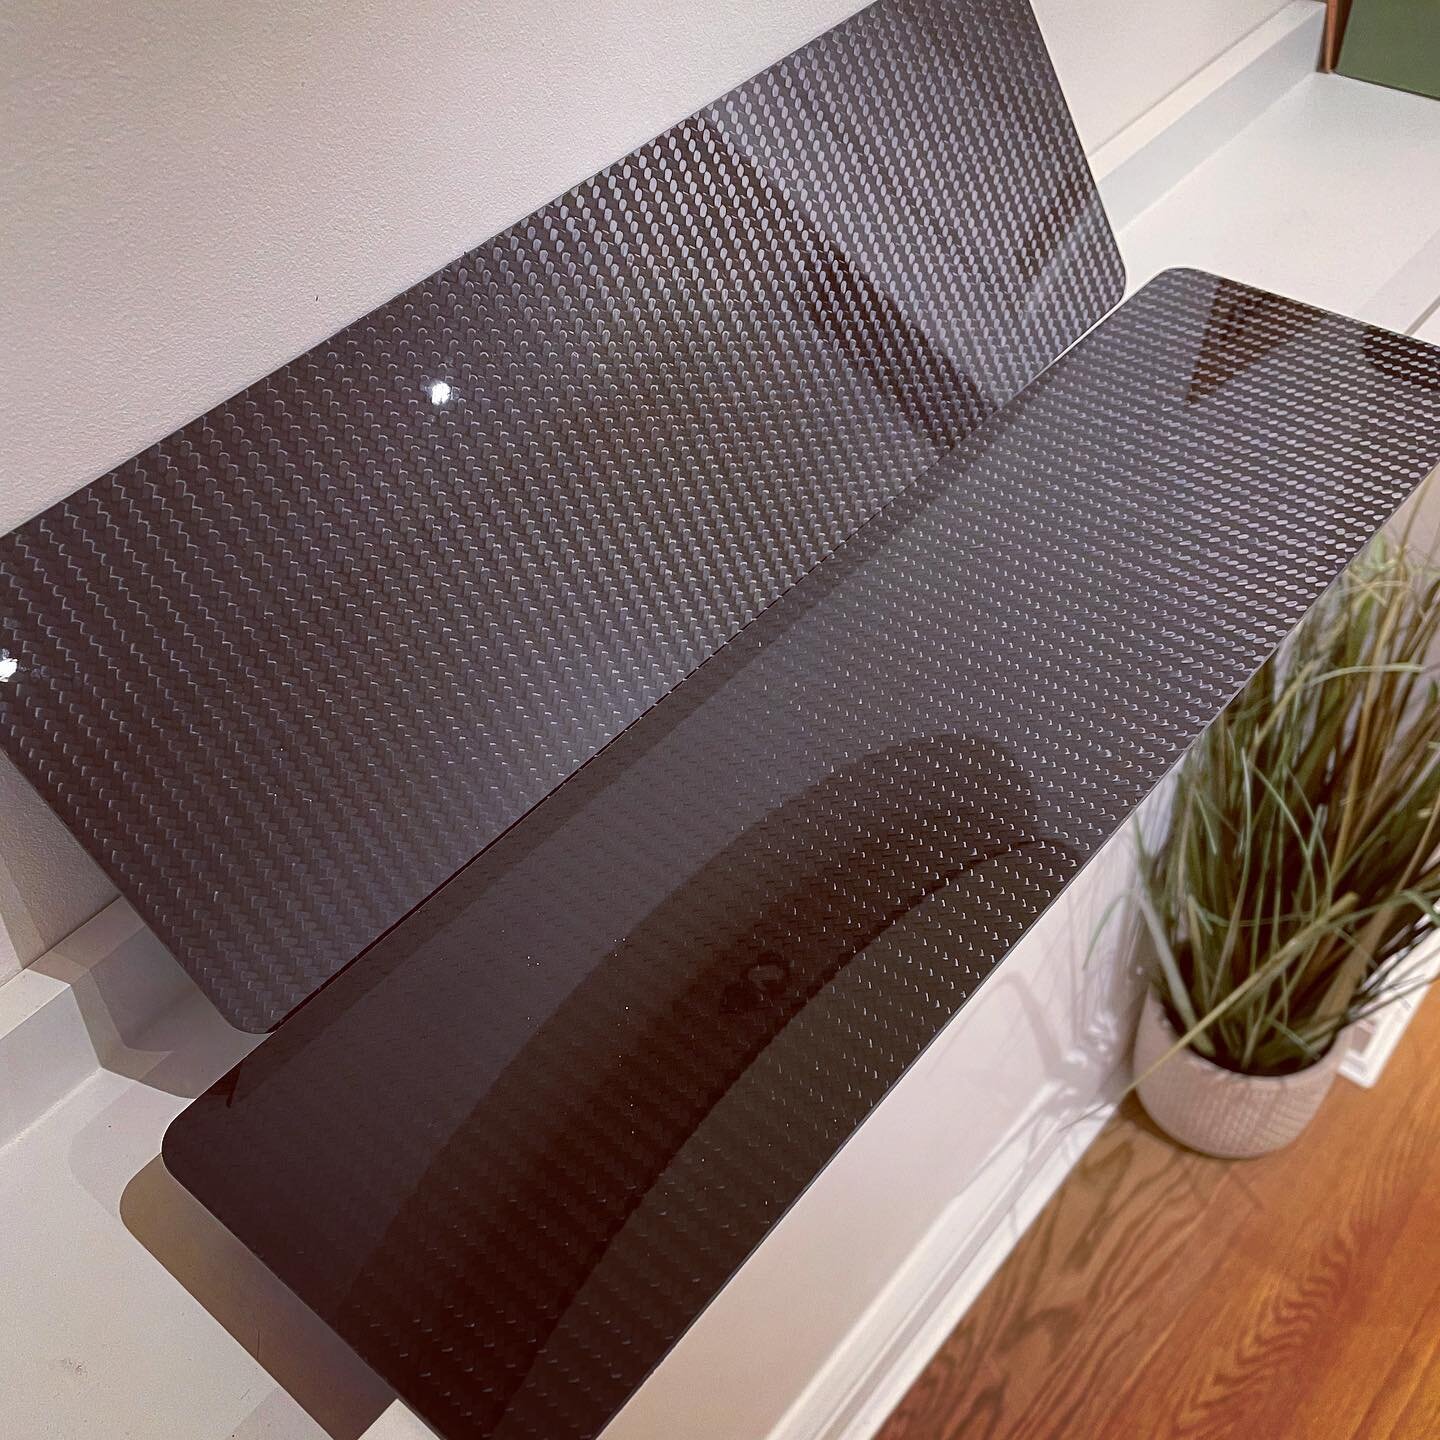 ⬆️⬇️ Vertical carbon stripes - these plates were machined at 45 degrees to the weave pattern - 3k 2x2 #carbonfibre twill #carboncutuk #carbonfiber #carbonfibre